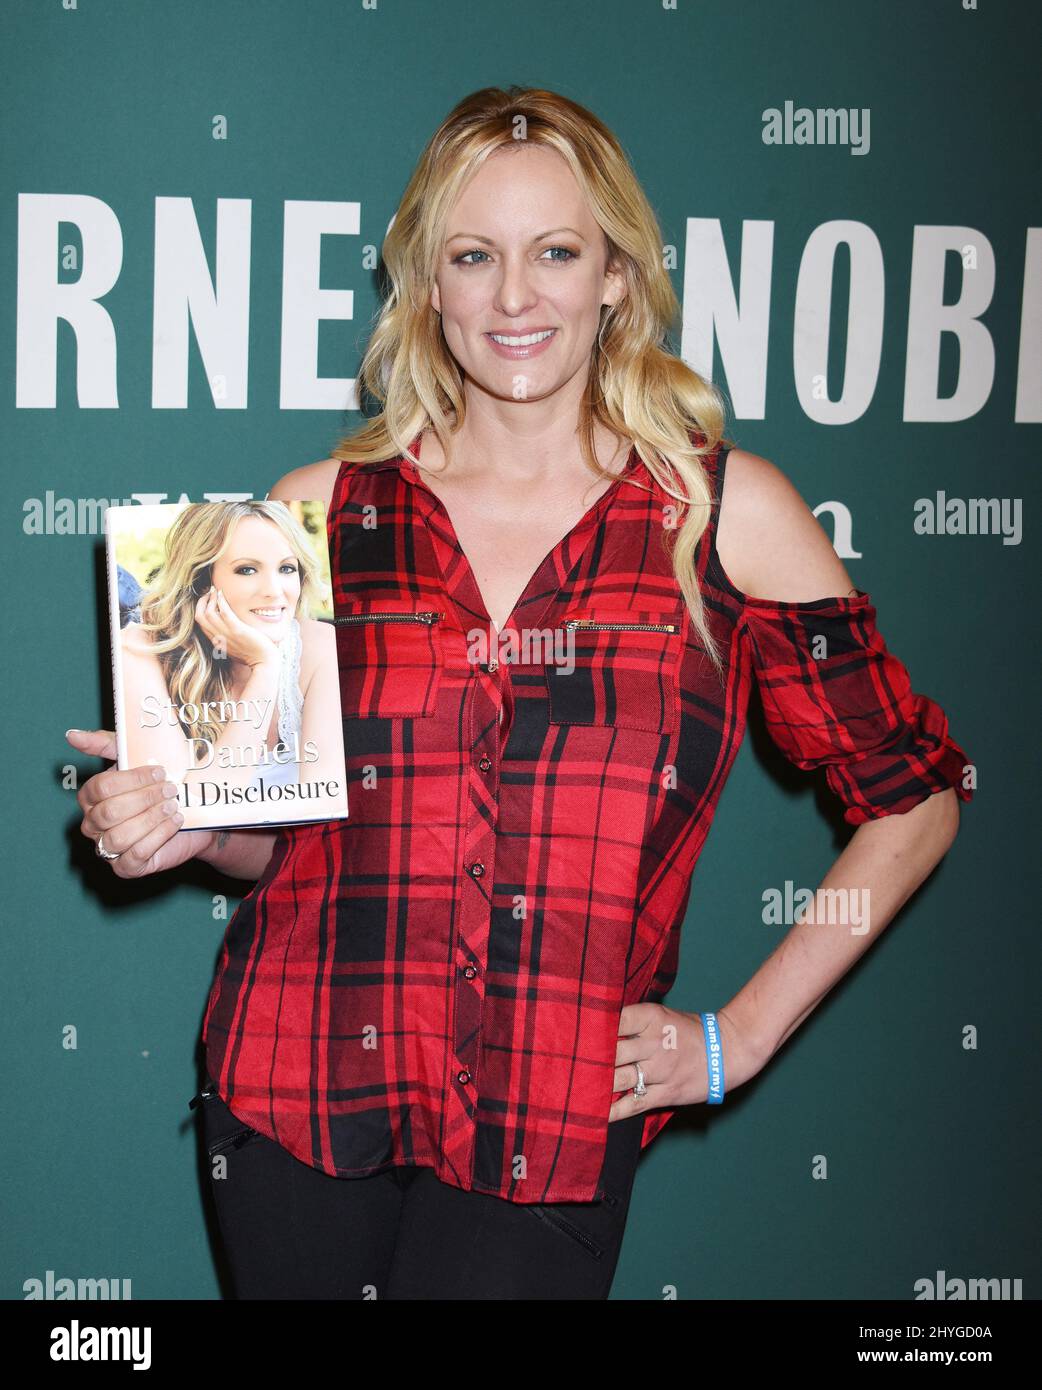 Stormy Daniels at the Stormy Daniels 'Full Disclosure' Book Event held at Barnes and Noble at The Grove on October 4, 2018 in Los Angeles, USA. Stock Photo